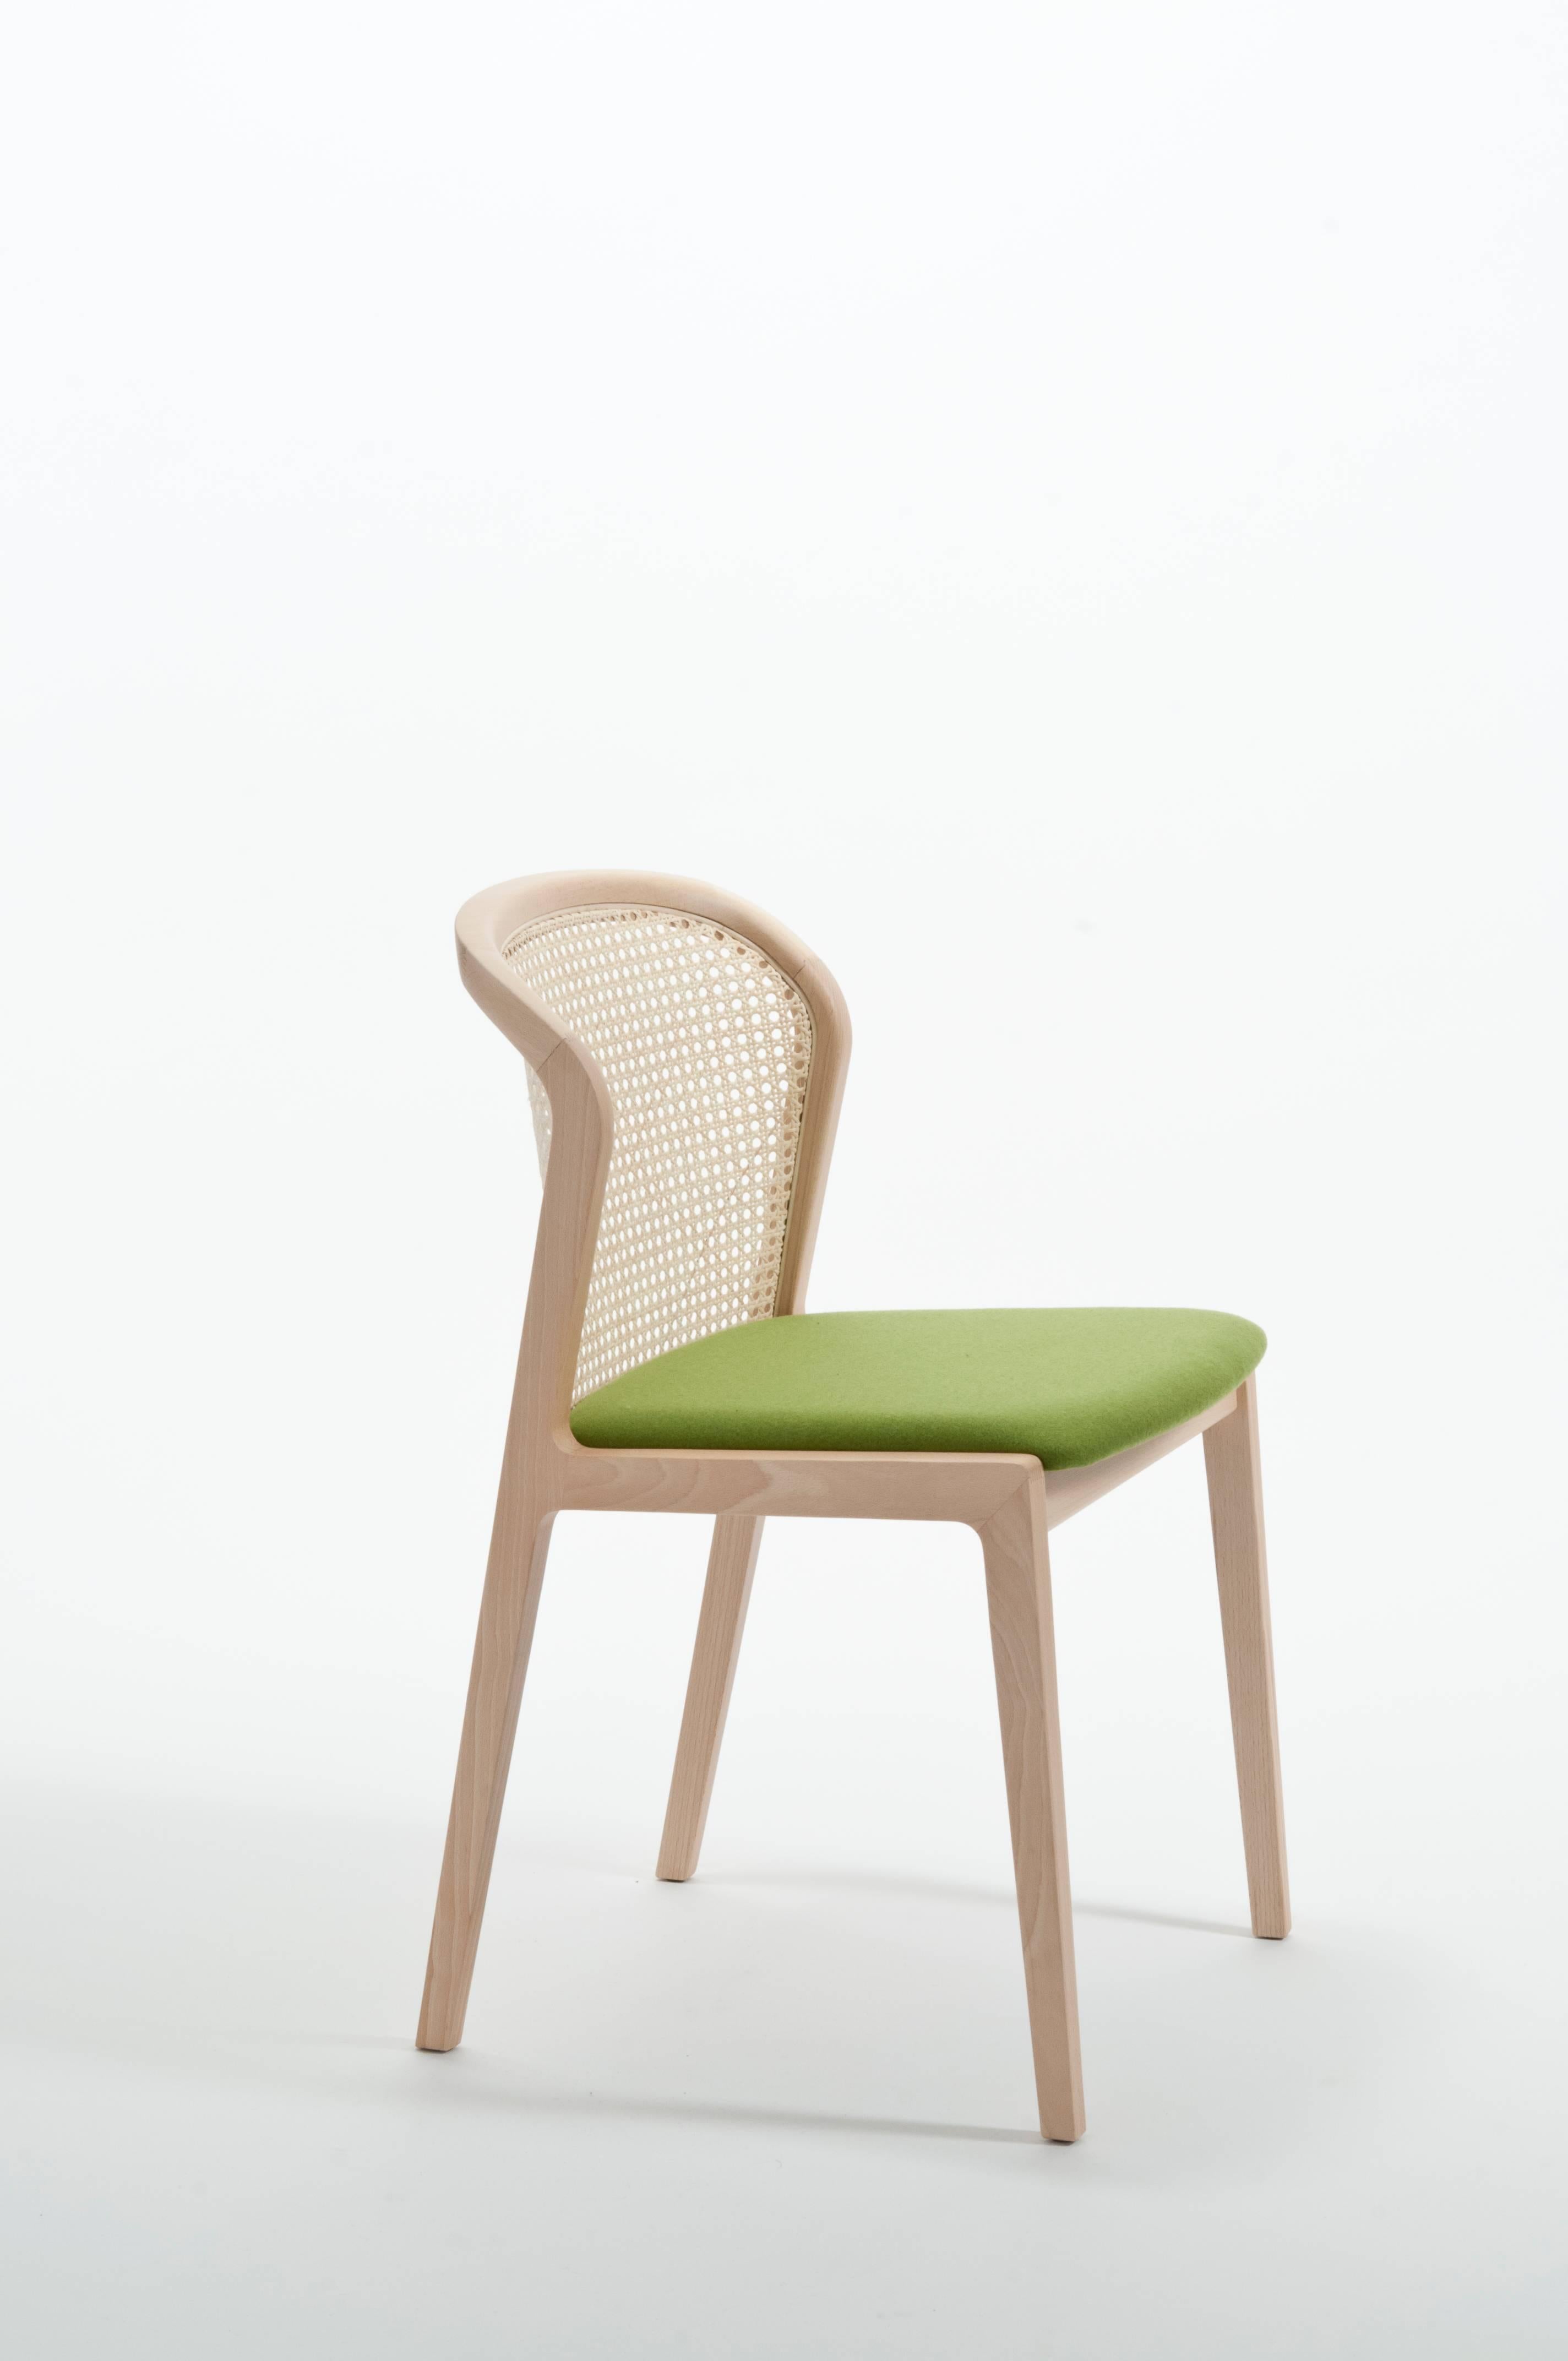 Machine-Made Vienna Chair by Colé, Modern Design in Wood and Straw, Black Upholstered Seat For Sale